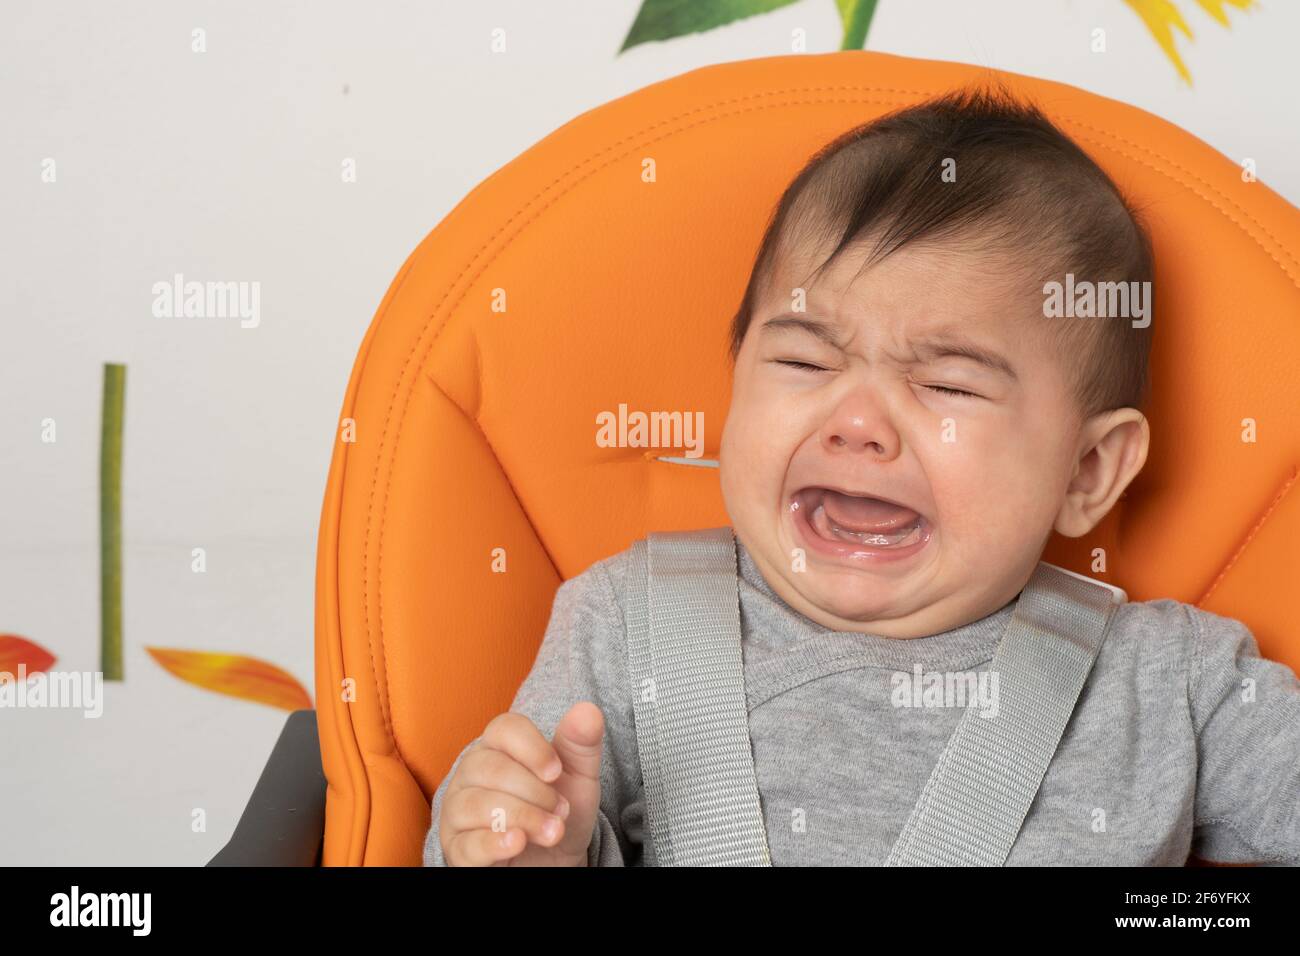 Six month old baby boy in high chair crying, closeup Stock Photo